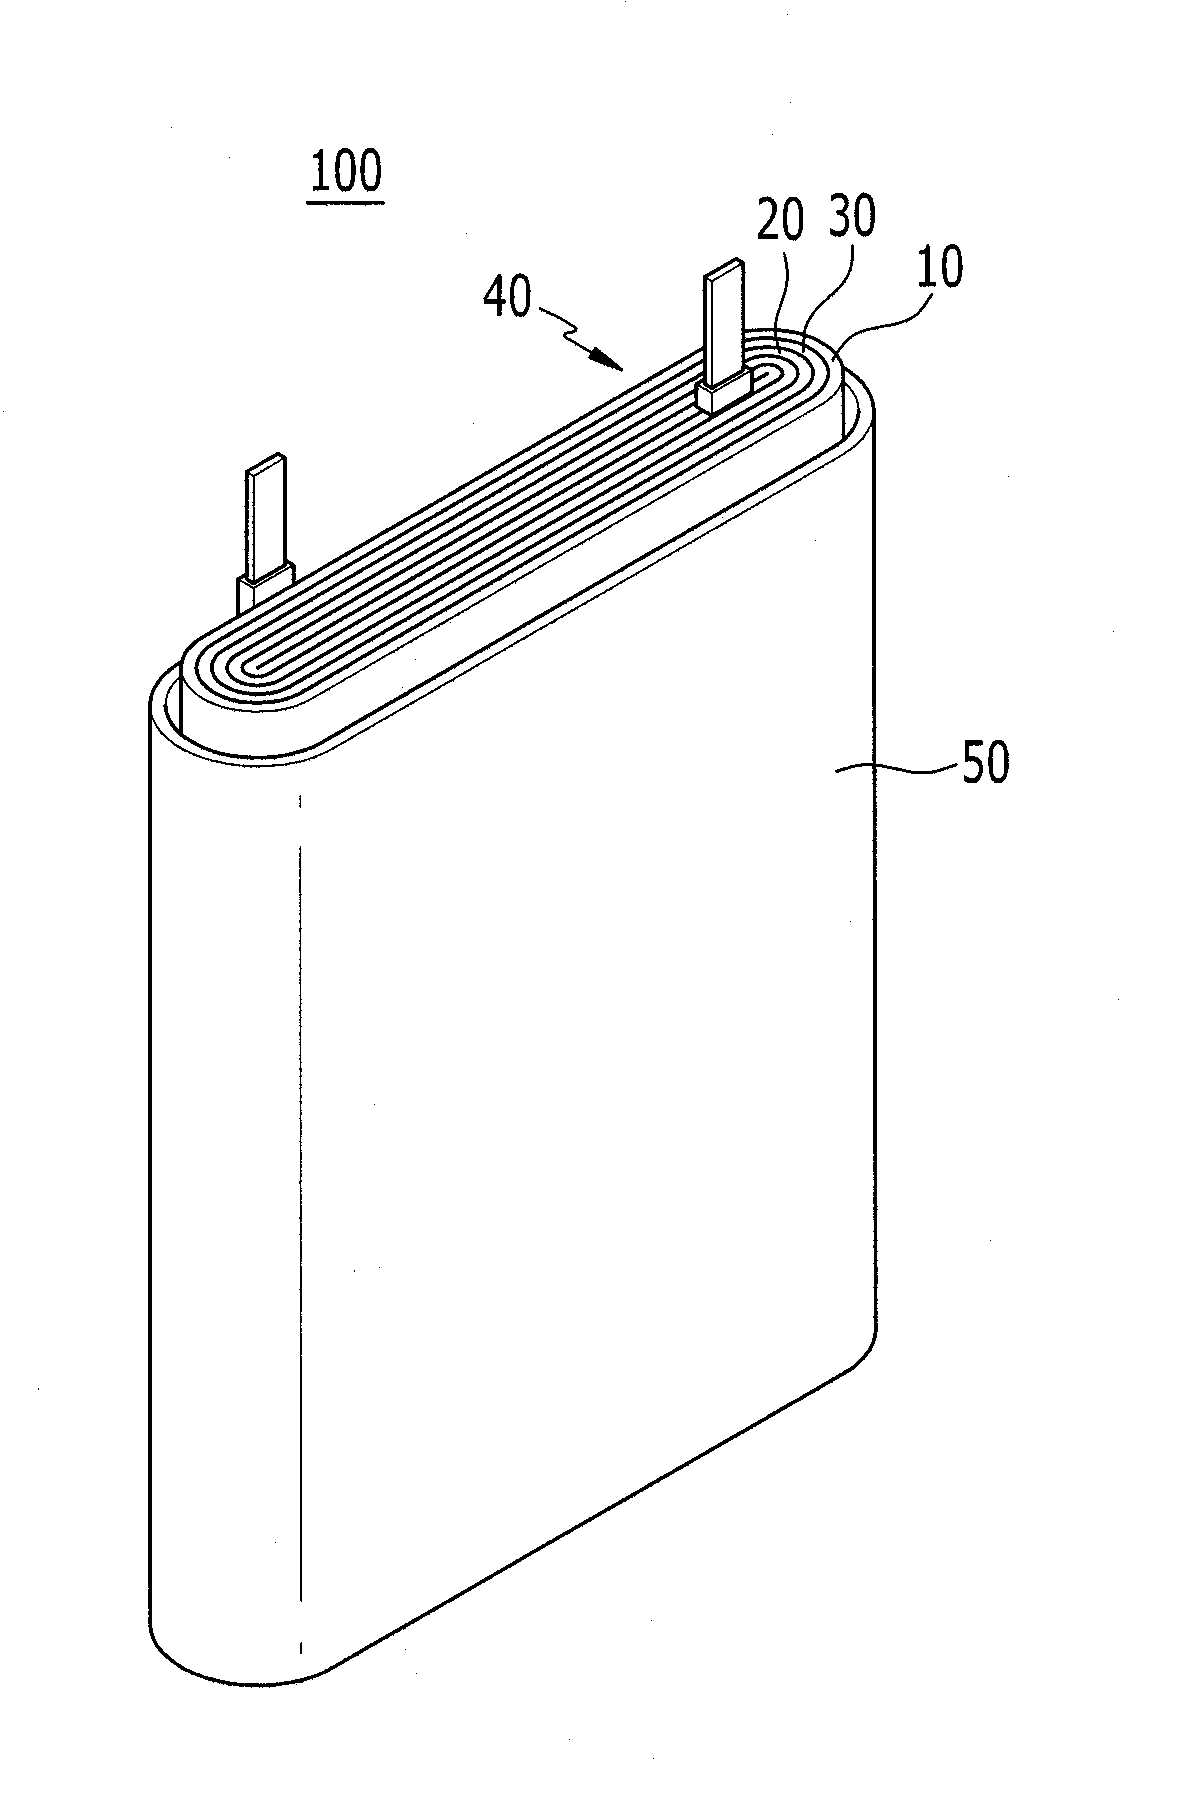 Rechargeable lithium battery with controlled particle size ratio of activated carbon to positive active material